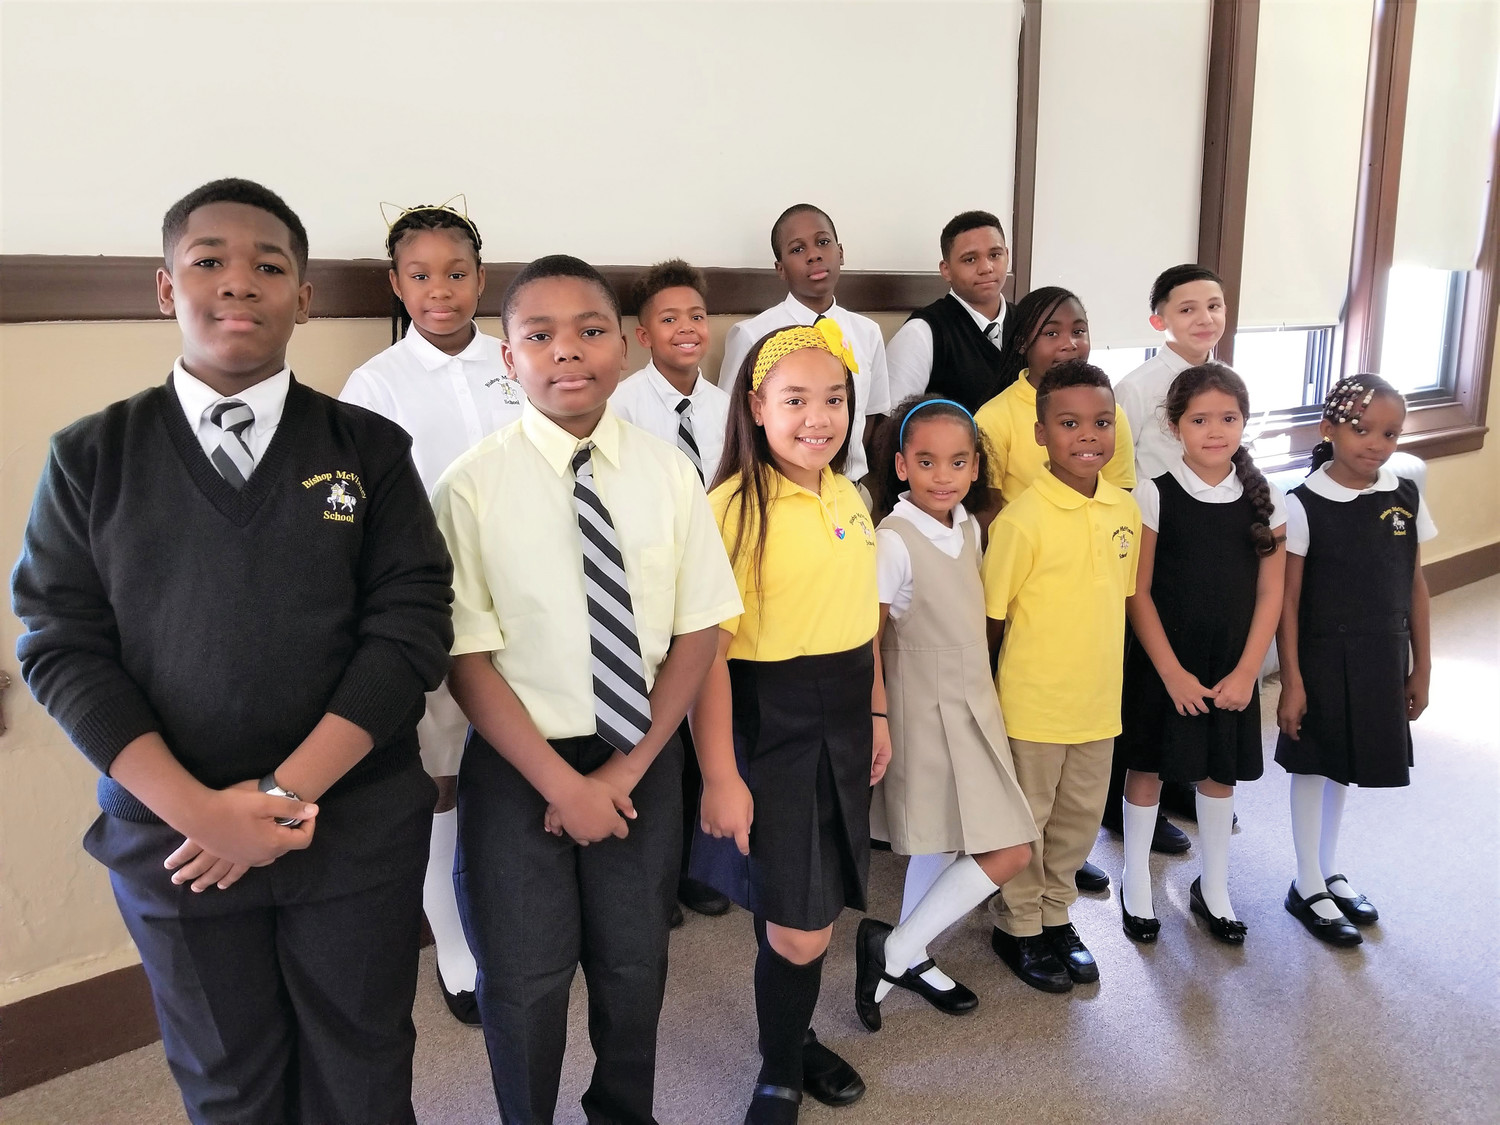 Bishop McVinney School in South Providence has organized a school supplies drive for its students and teachers, for items including notebooks, loose leaf paper, pens, pencils, scissors, glue sticks and crayons.